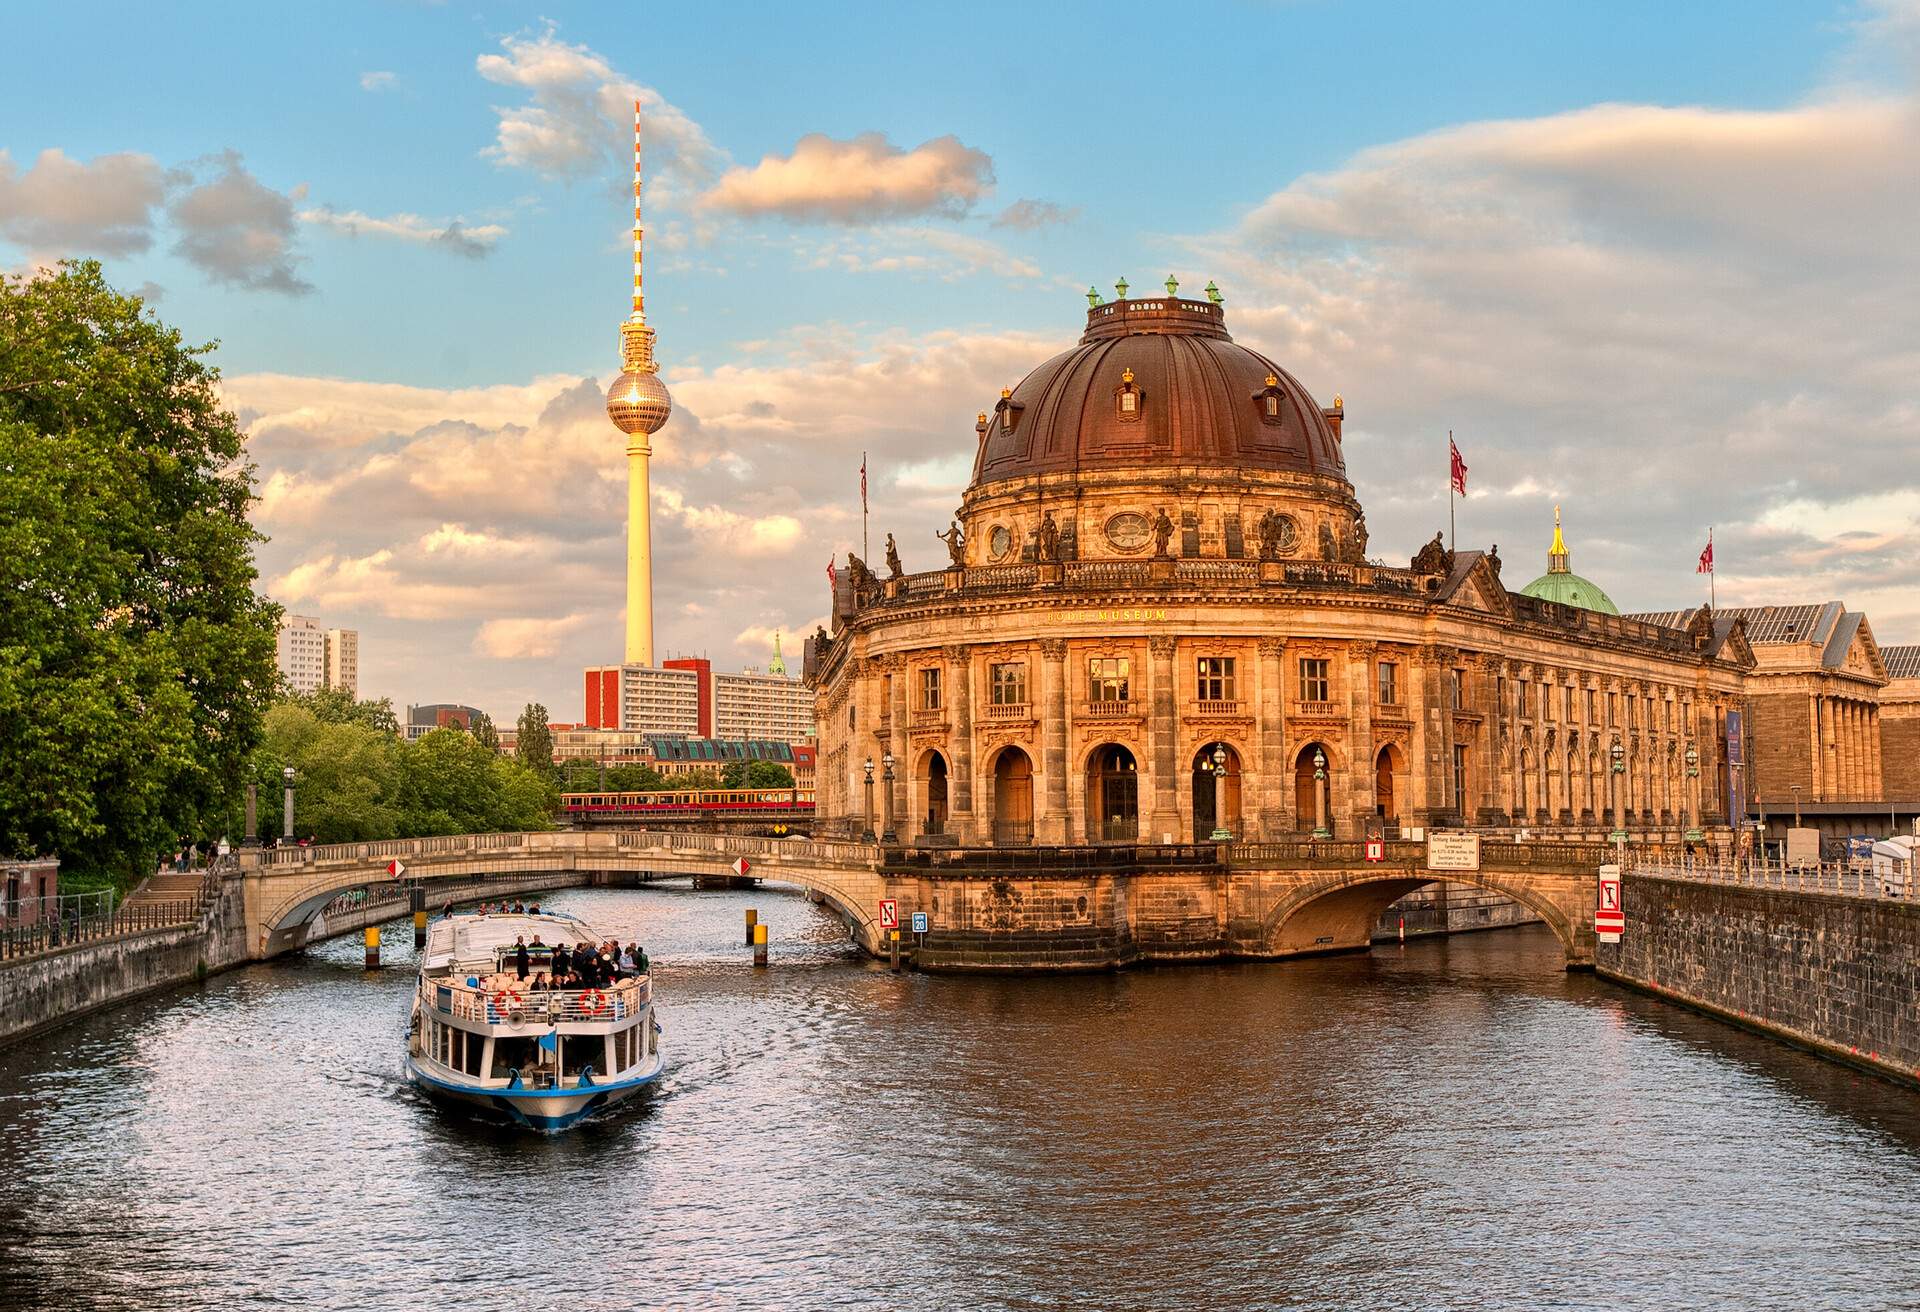 A Museum island on Spree river and Alexanderplatz TV tower in center of Berlin, German boat cruises a river with views of the Baroque-style Bode Museum and the Berlin TV Tower.